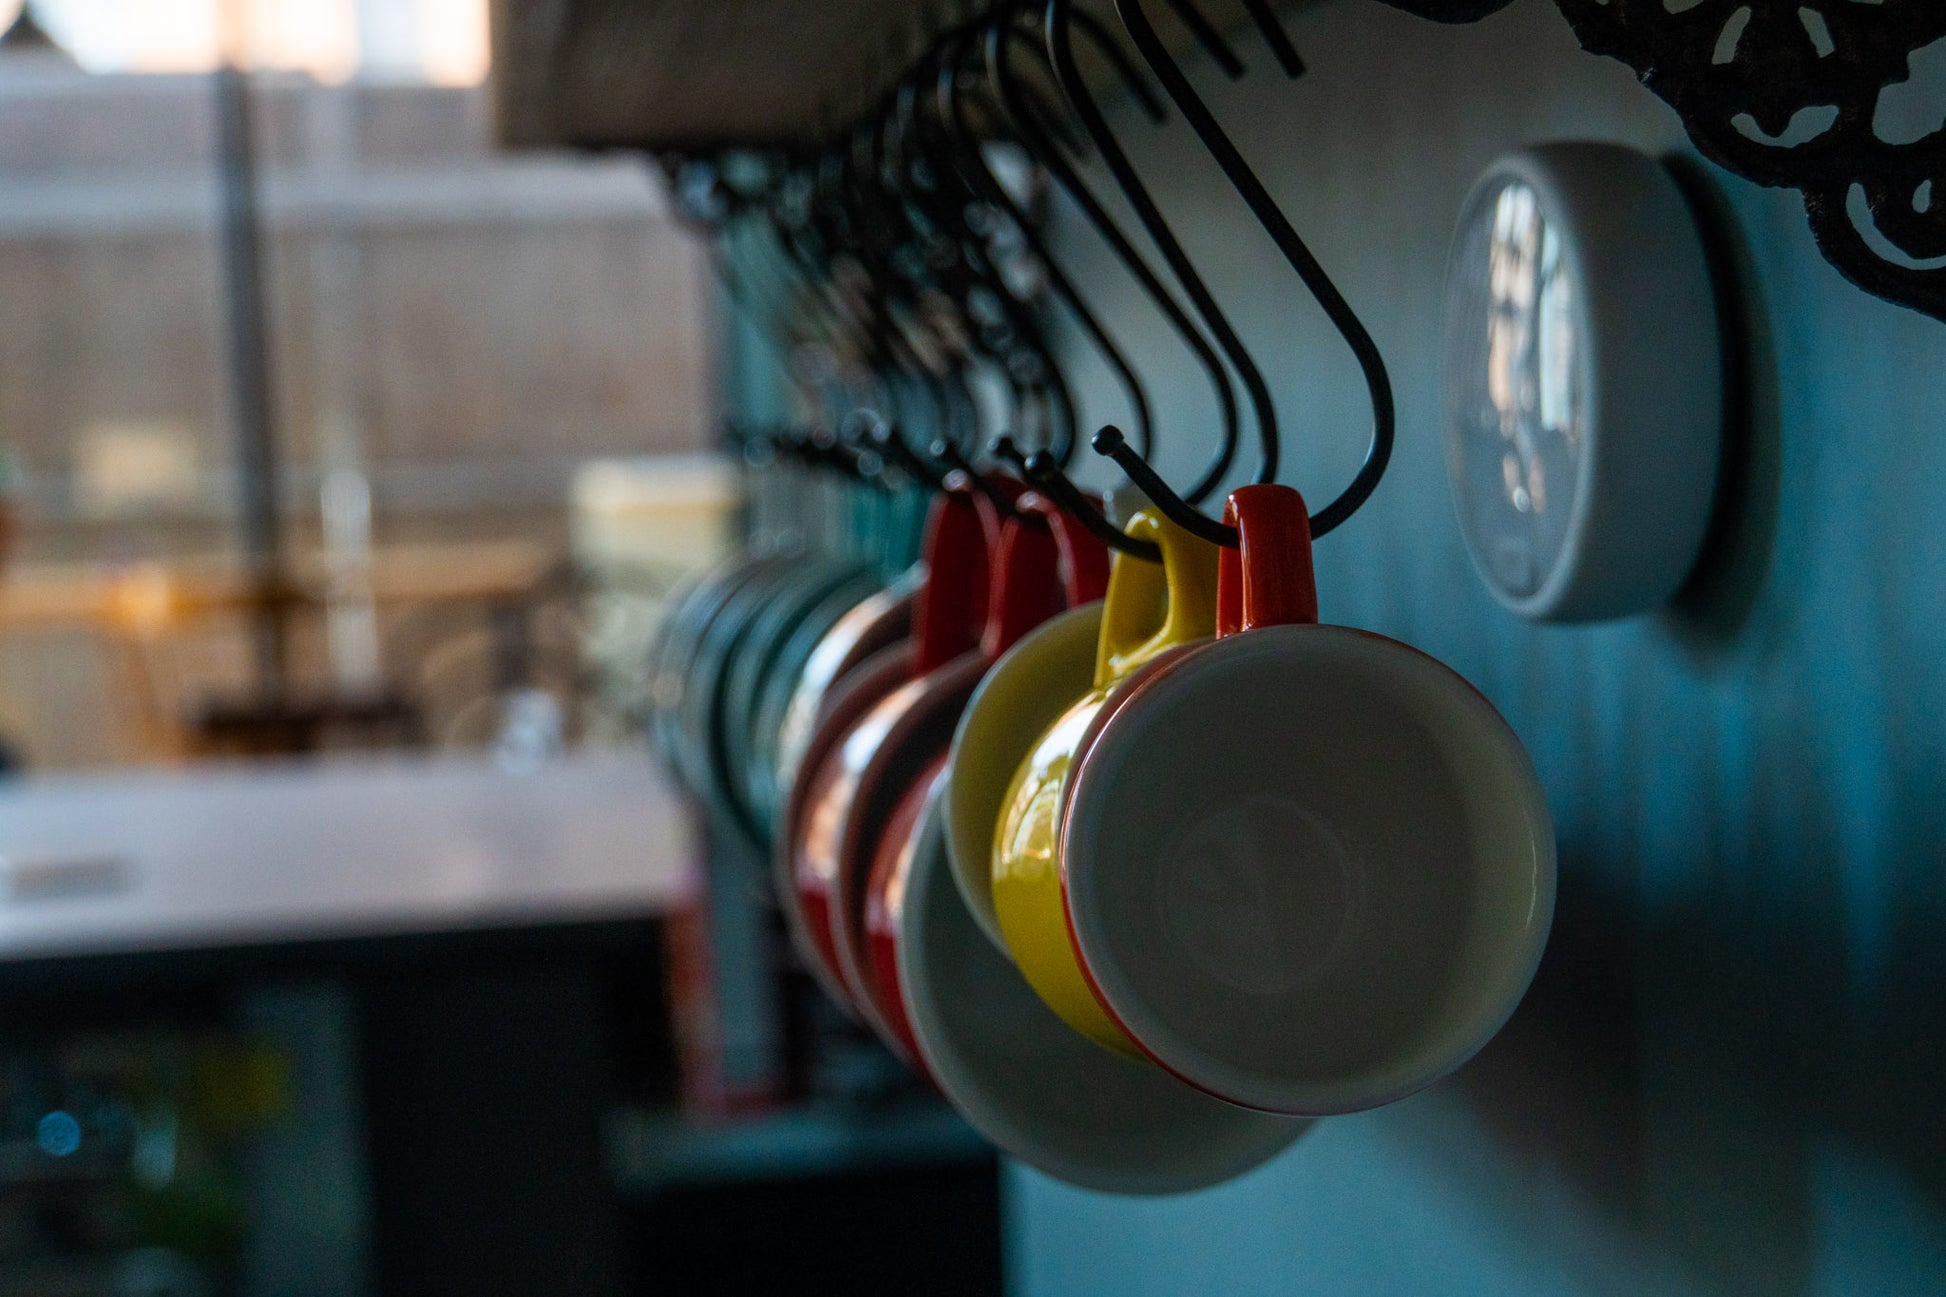 A focused shot of the hanging various coffee and tea mugs. They are hanging from S hooks which are hanging from the underside of the shelf.